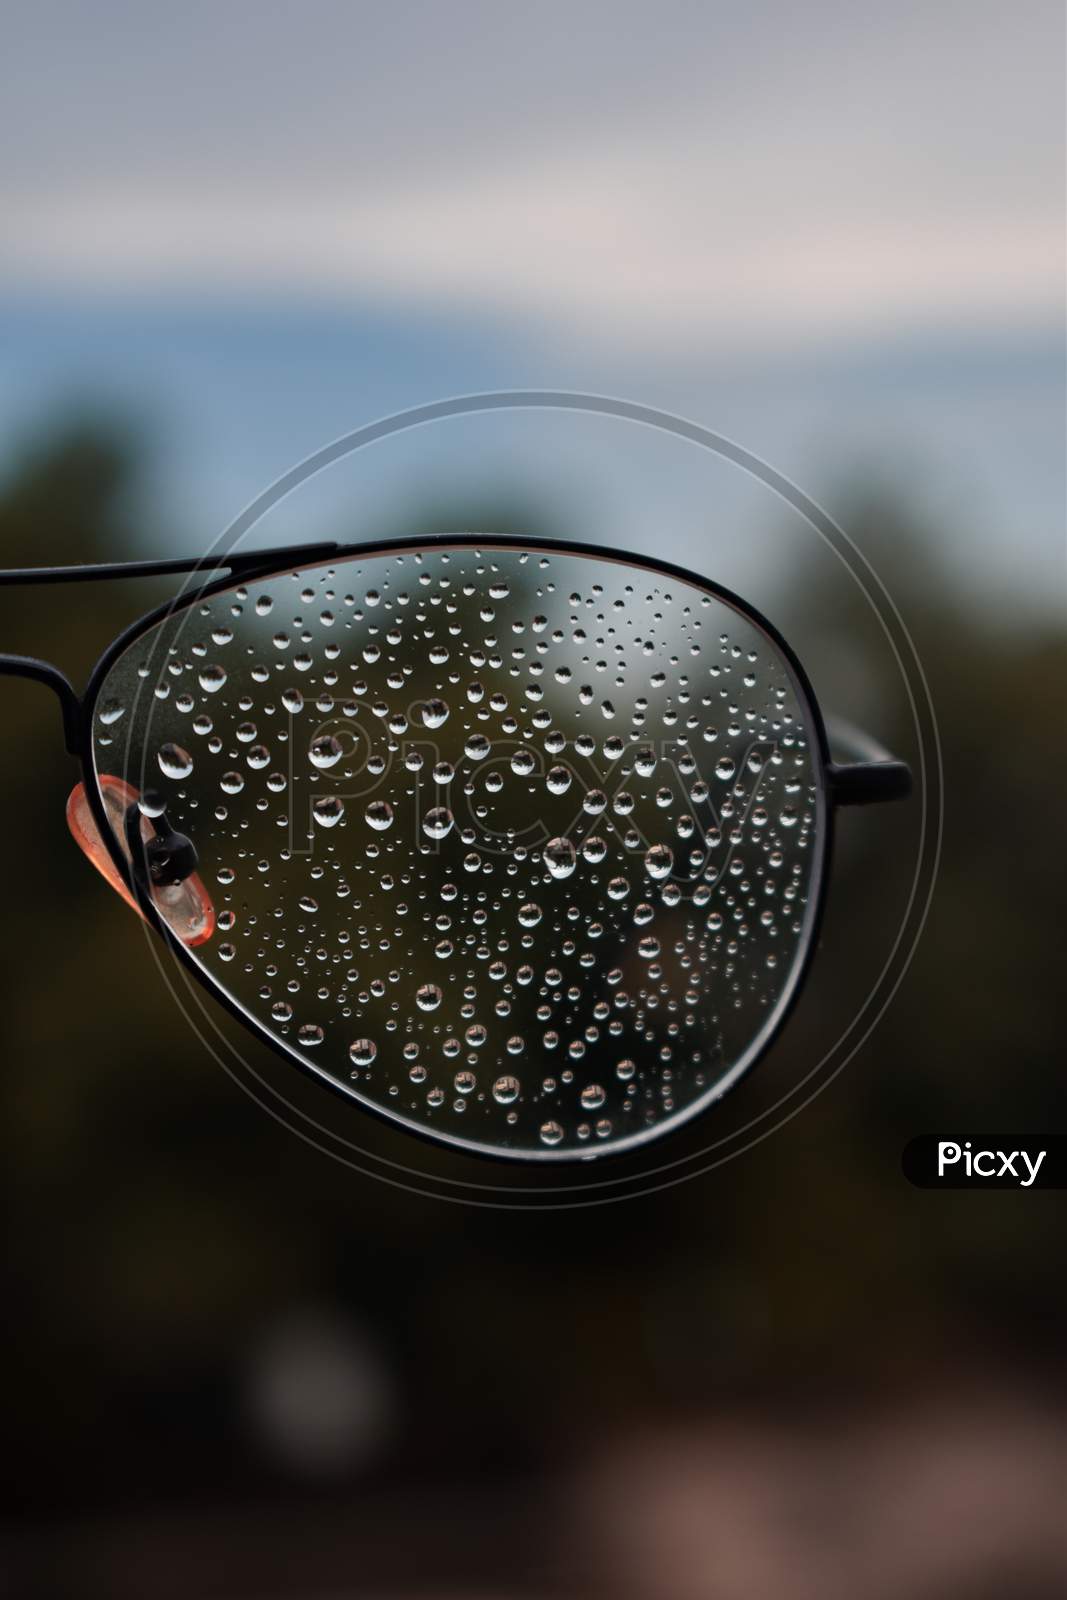 Water droplets on specs